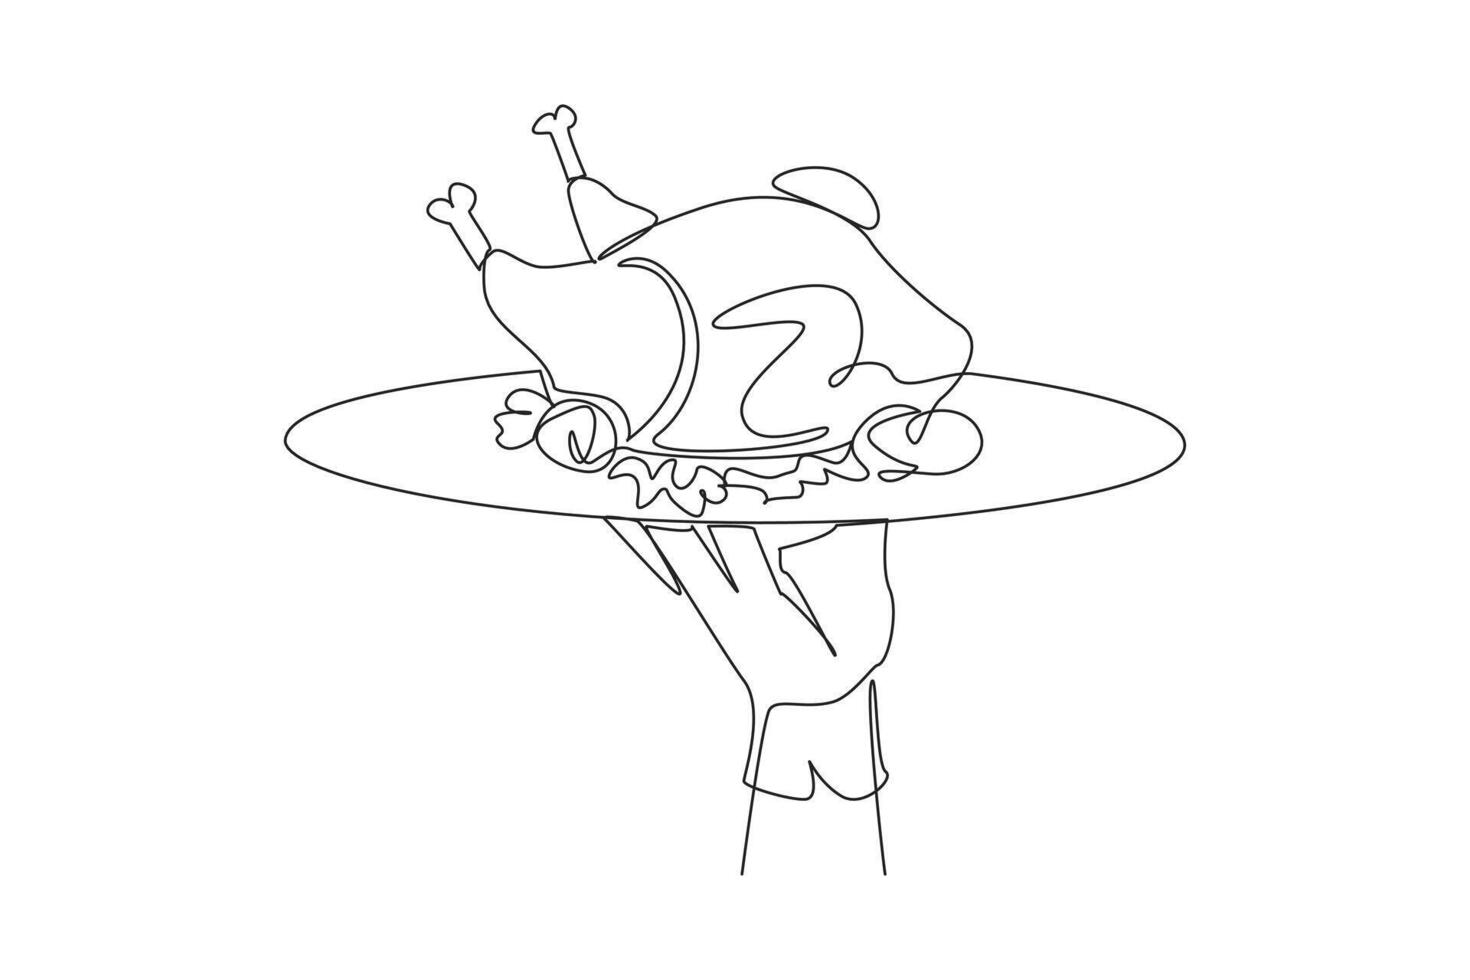 Single one line drawing the waiter holds food tray serving roast chicken. Foods that can be consumed while on a diet. Chicken with whole pieces. Delicious. Continuous line design graphic illustration vector